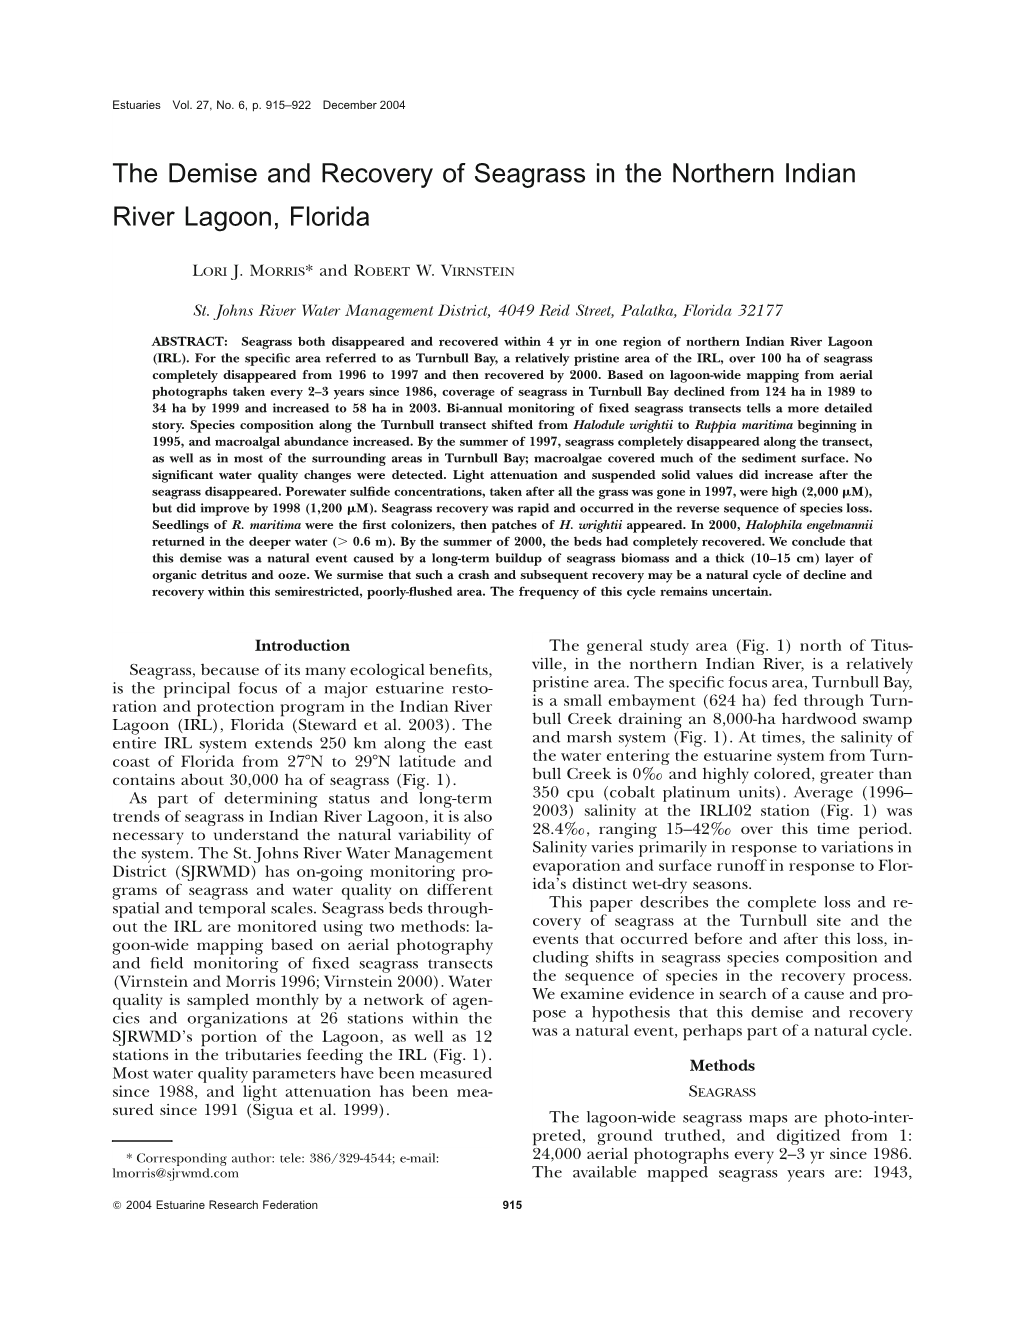 The Demise and Recovery of Seagrass in the Northern Indian River Lagoon, Florida